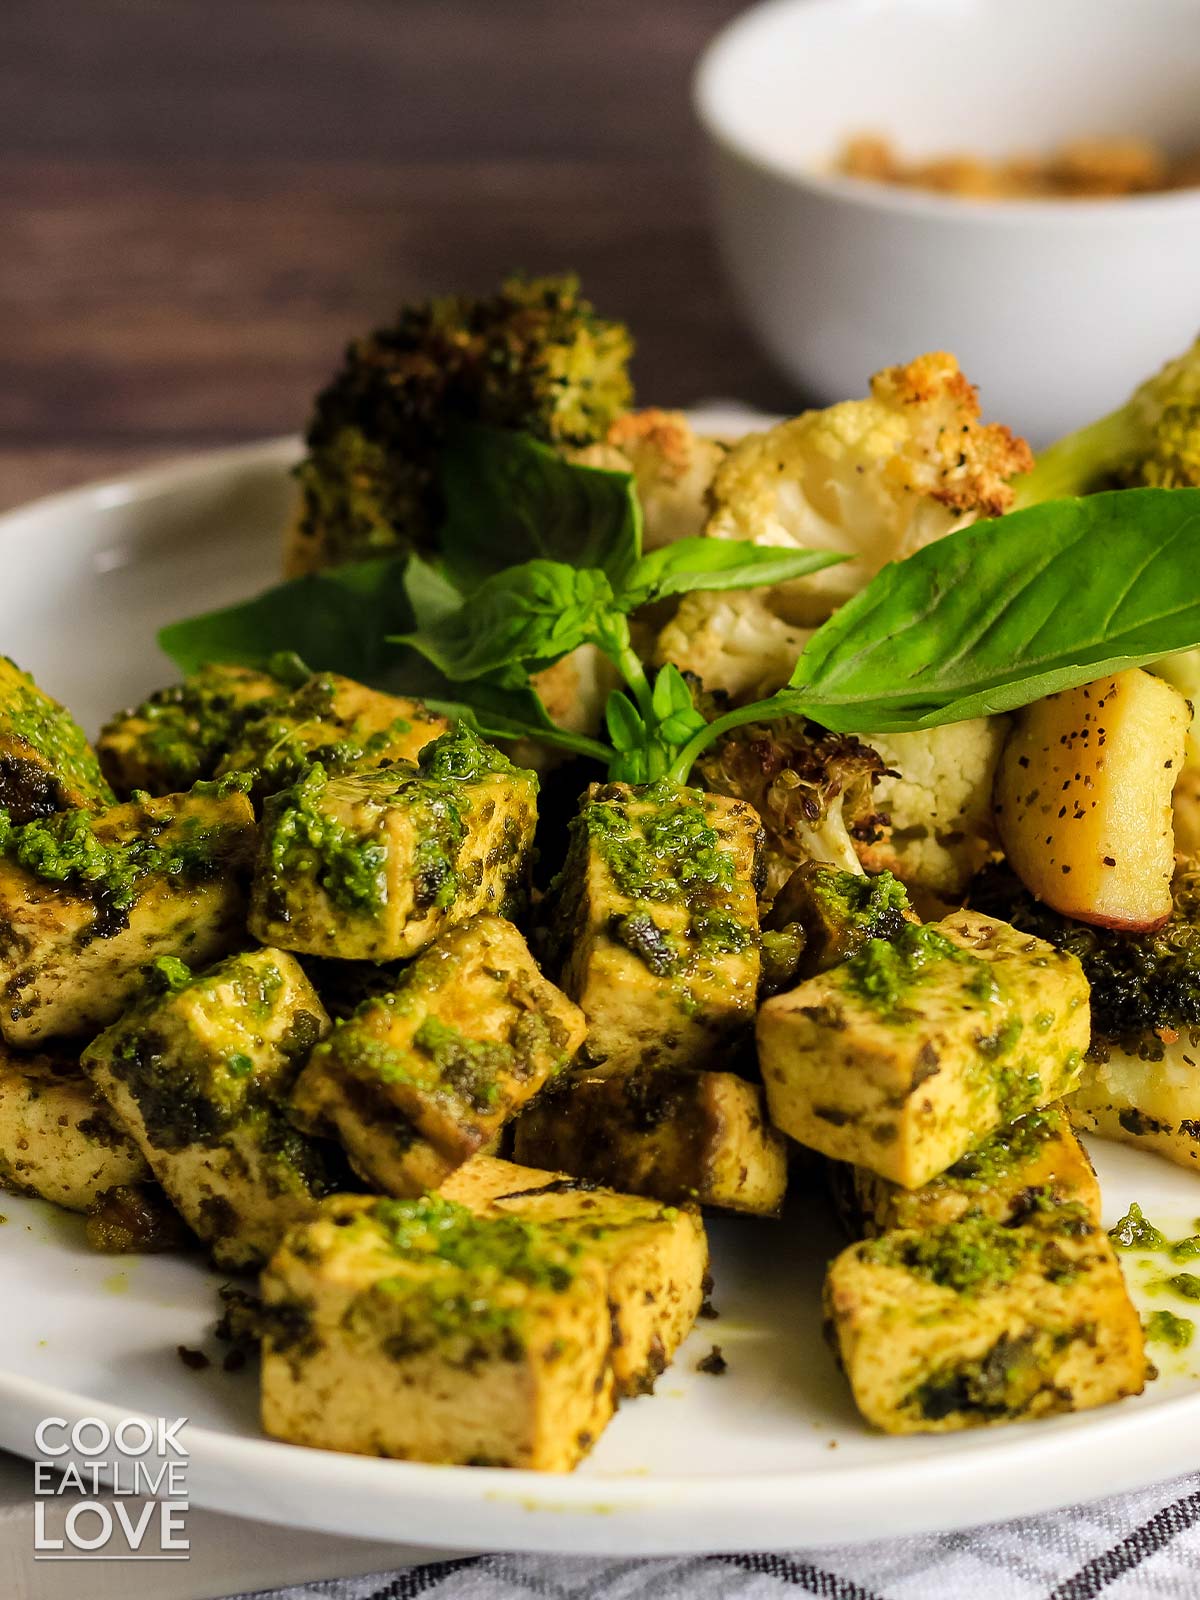 Baked pesto tofu sheet pan dinner served up on a plate.